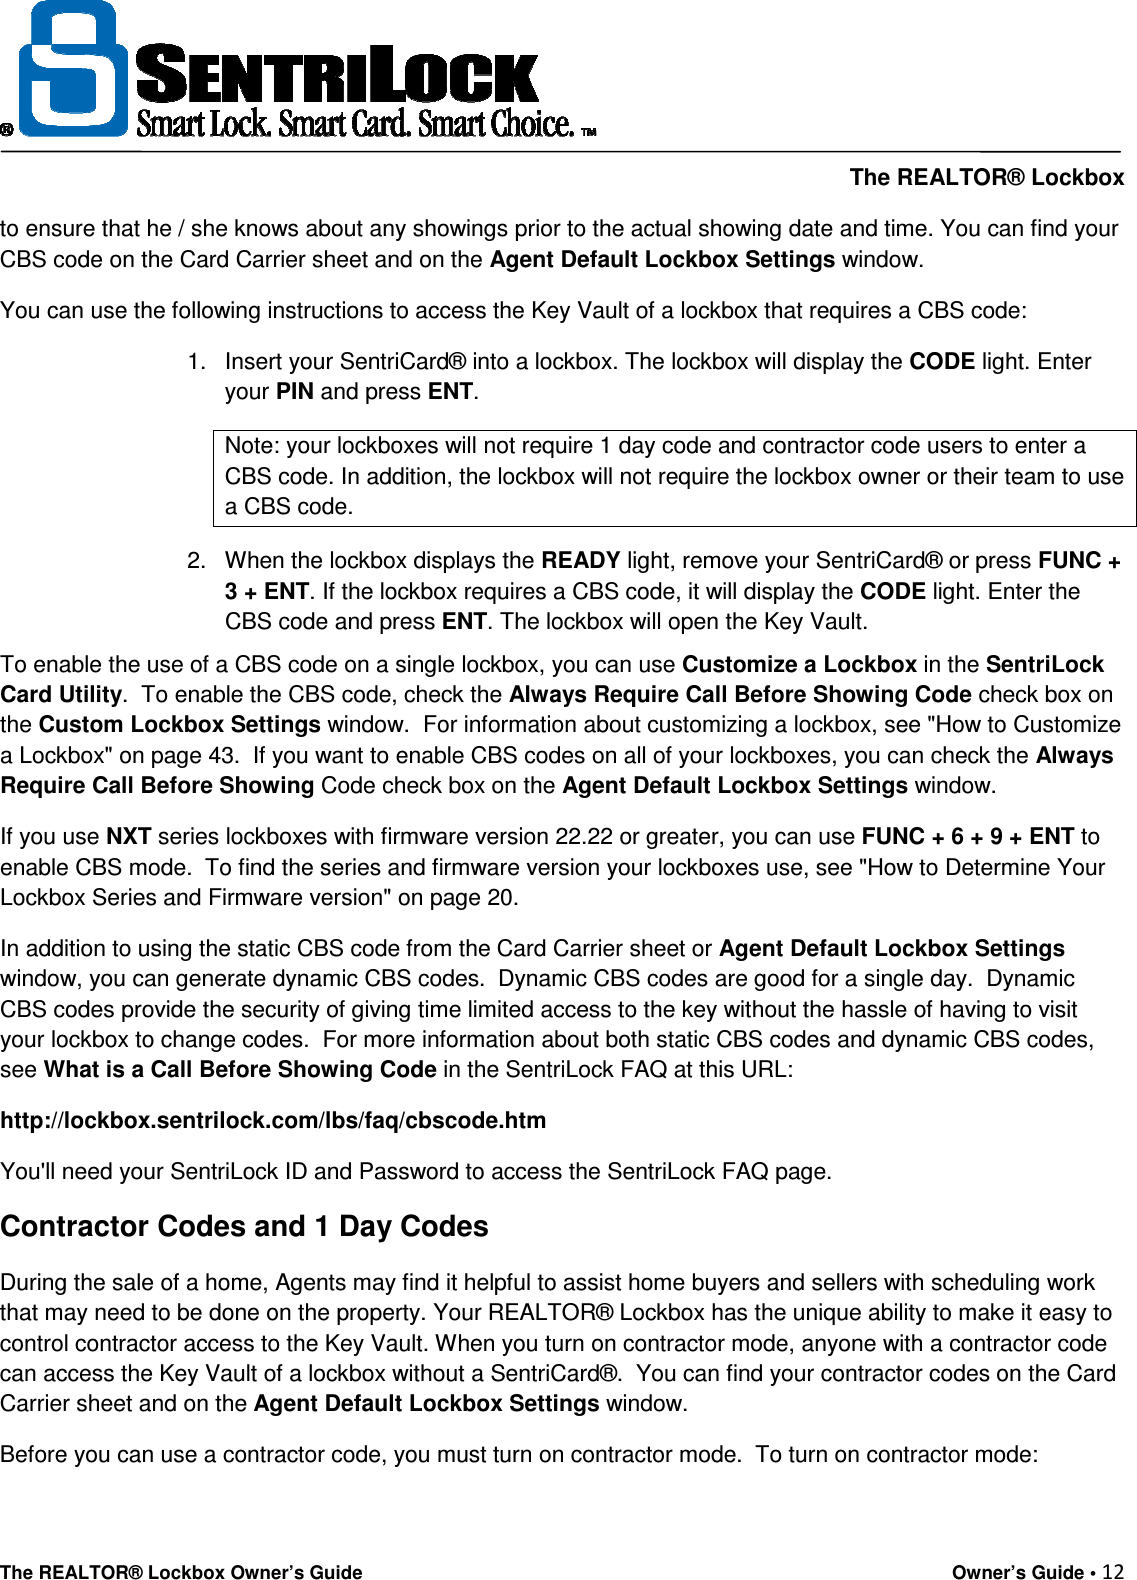     The REALTOR® Lockbox The REALTOR® Lockbox Owner’s Guide    Owner’s Guide • 12  to ensure that he / she knows about any showings prior to the actual showing date and time. You can find your CBS code on the Card Carrier sheet and on the Agent Default Lockbox Settings window. You can use the following instructions to access the Key Vault of a lockbox that requires a CBS code: 1.  Insert your SentriCard® into a lockbox. The lockbox will display the CODE light. Enter your PIN and press ENT. Note: your lockboxes will not require 1 day code and contractor code users to enter a CBS code. In addition, the lockbox will not require the lockbox owner or their team to use a CBS code. 2.  When the lockbox displays the READY light, remove your SentriCard® or press FUNC + 3 + ENT. If the lockbox requires a CBS code, it will display the CODE light. Enter the CBS code and press ENT. The lockbox will open the Key Vault. To enable the use of a CBS code on a single lockbox, you can use Customize a Lockbox in the SentriLock Card Utility.  To enable the CBS code, check the Always Require Call Before Showing Code check box on the Custom Lockbox Settings window.  For information about customizing a lockbox, see &quot;How to Customize a Lockbox&quot; on page 43.  If you want to enable CBS codes on all of your lockboxes, you can check the Always Require Call Before Showing Code check box on the Agent Default Lockbox Settings window. If you use NXT series lockboxes with firmware version 22.22 or greater, you can use FUNC + 6 + 9 + ENT to enable CBS mode.  To find the series and firmware version your lockboxes use, see &quot;How to Determine Your Lockbox Series and Firmware version&quot; on page 20. In addition to using the static CBS code from the Card Carrier sheet or Agent Default Lockbox Settings window, you can generate dynamic CBS codes.  Dynamic CBS codes are good for a single day.  Dynamic CBS codes provide the security of giving time limited access to the key without the hassle of having to visit your lockbox to change codes.  For more information about both static CBS codes and dynamic CBS codes, see What is a Call Before Showing Code in the SentriLock FAQ at this URL: http://lockbox.sentrilock.com/lbs/faq/cbscode.htm You&apos;ll need your SentriLock ID and Password to access the SentriLock FAQ page. Contractor Codes and 1 Day Codes During the sale of a home, Agents may find it helpful to assist home buyers and sellers with scheduling work that may need to be done on the property. Your REALTOR® Lockbox has the unique ability to make it easy to control contractor access to the Key Vault. When you turn on contractor mode, anyone with a contractor code can access the Key Vault of a lockbox without a SentriCard®.  You can find your contractor codes on the Card Carrier sheet and on the Agent Default Lockbox Settings window. Before you can use a contractor code, you must turn on contractor mode.  To turn on contractor mode: 